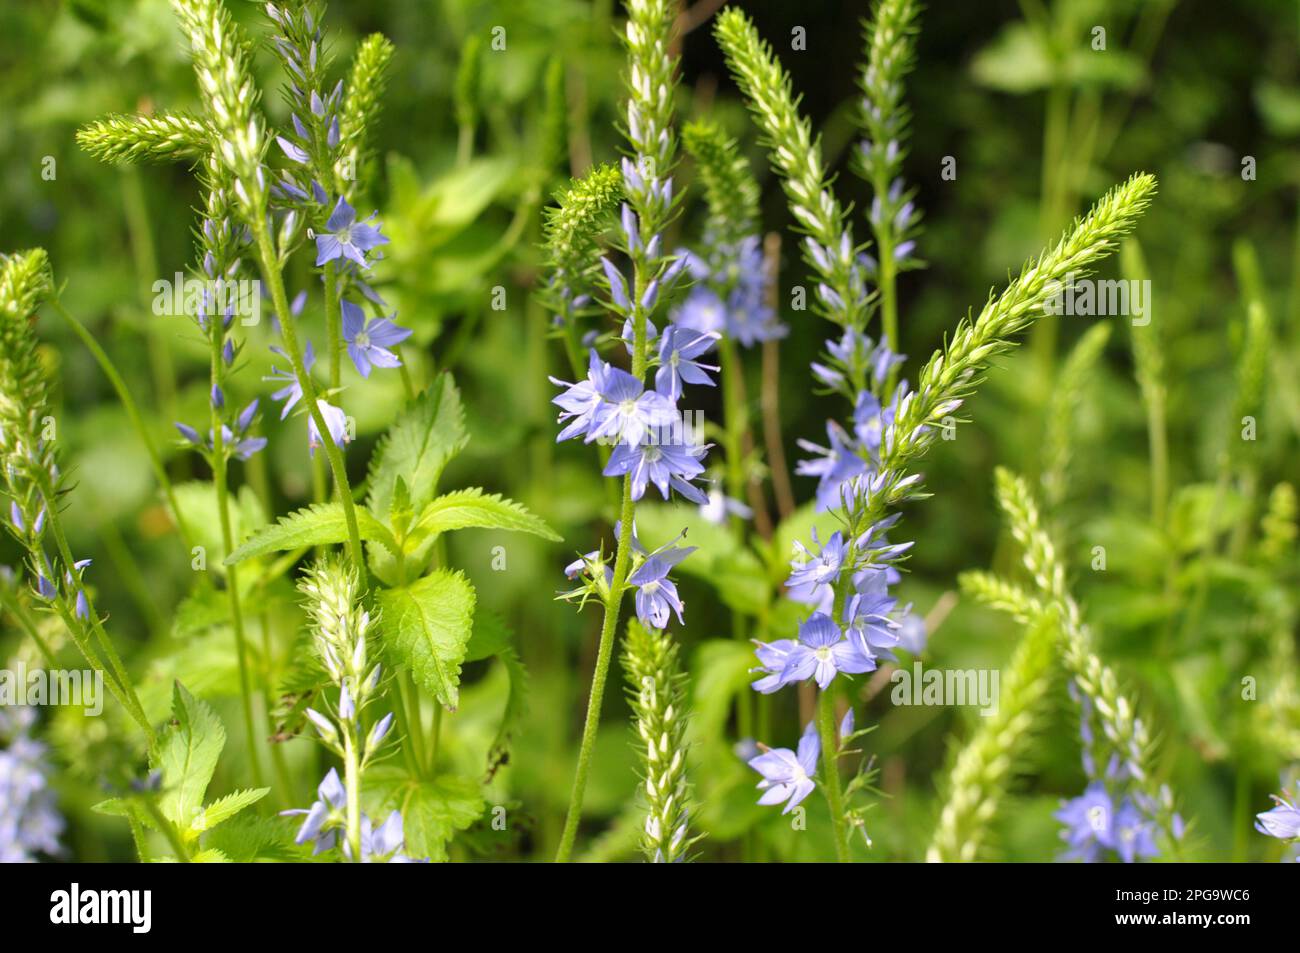 In the wild, veronica teucrium grows among grasses Stock Photo